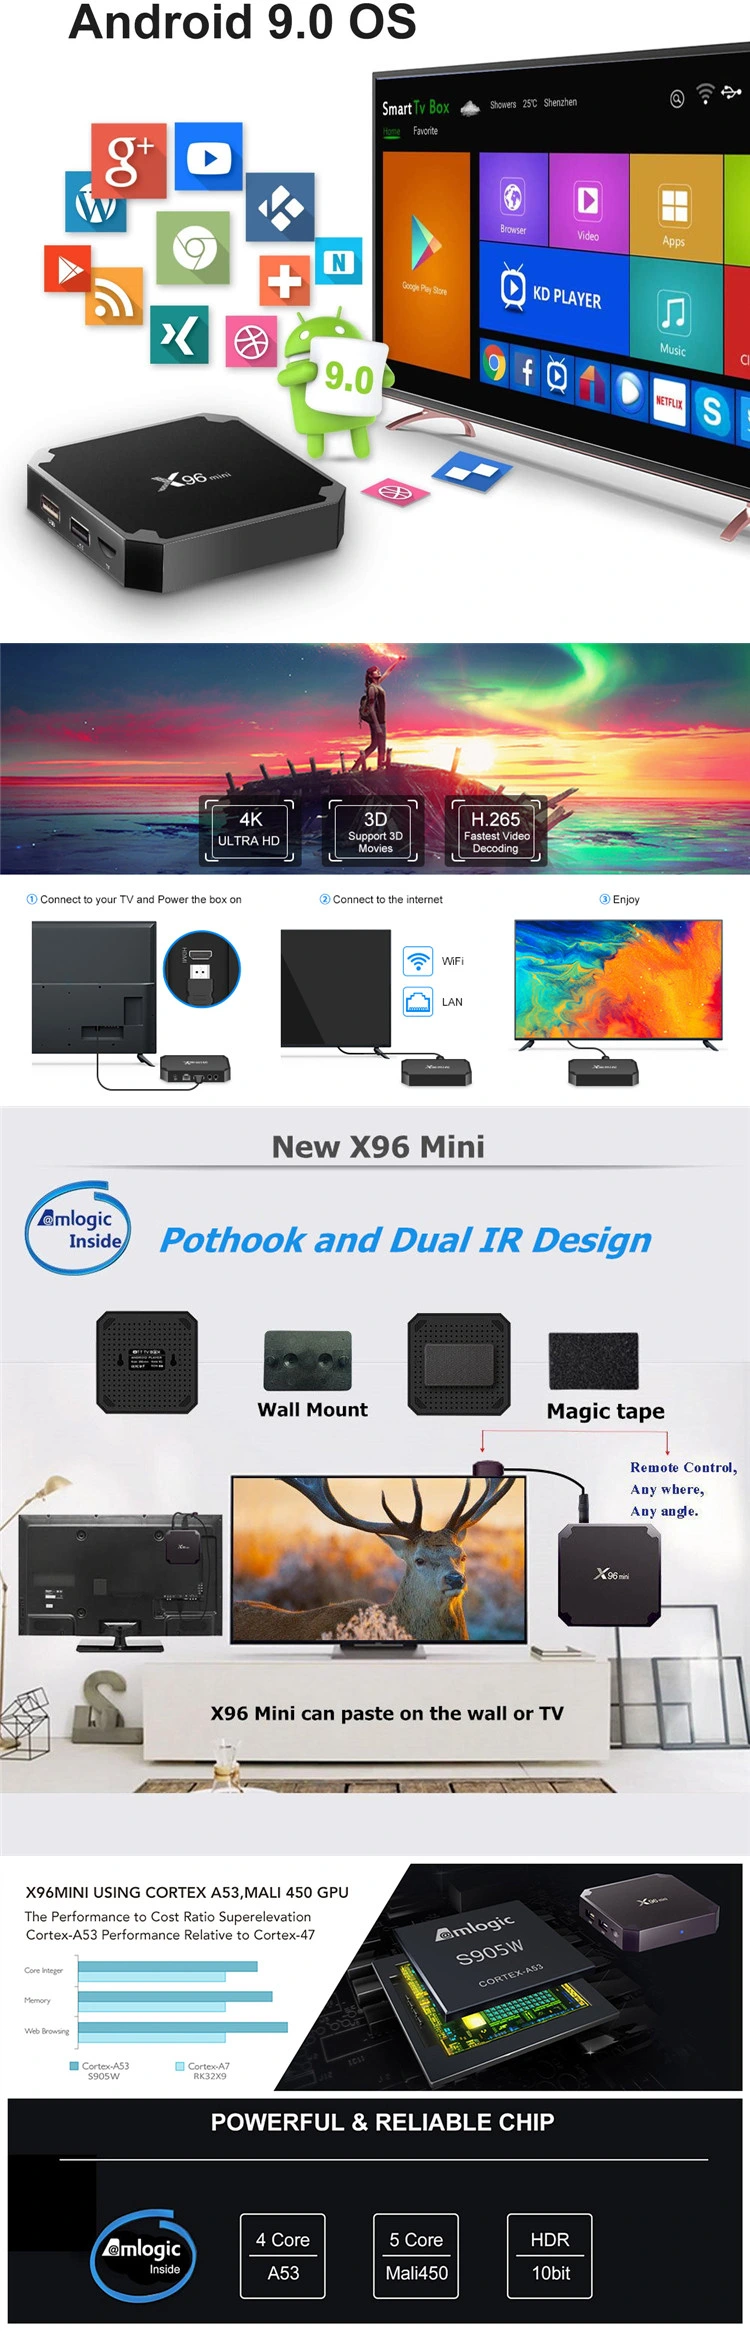 Amlogic S905W Android TV Box X96 Mini 1g 8g Smart TV Box Mini PC Android 9.0 Set Top Box with HDMI Cable Android Set Top Box